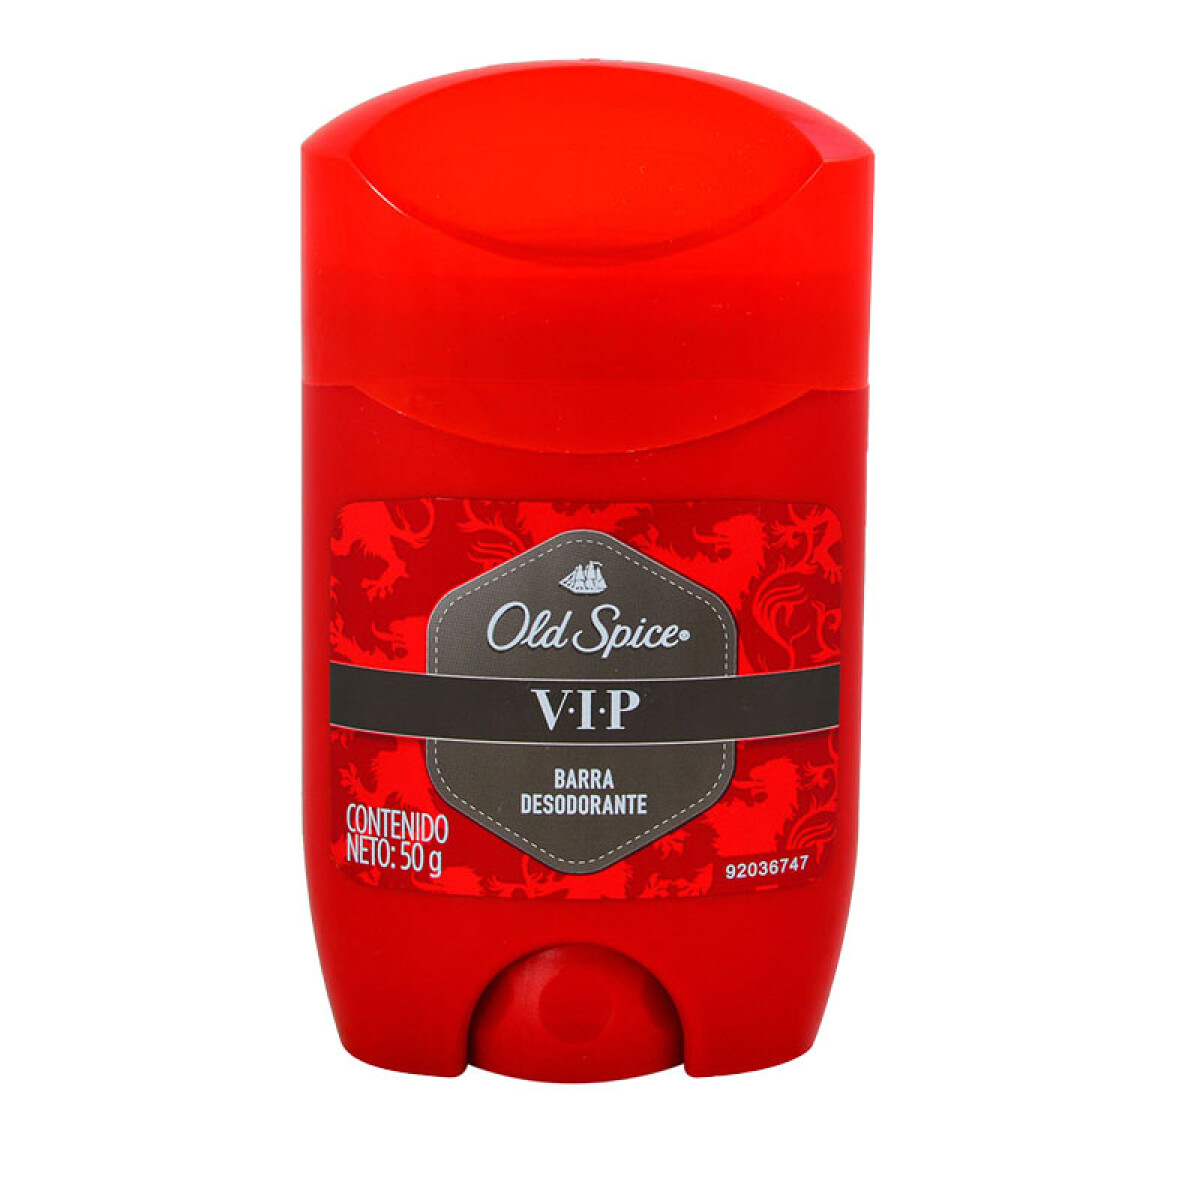 OLD SPICE barra 50g 